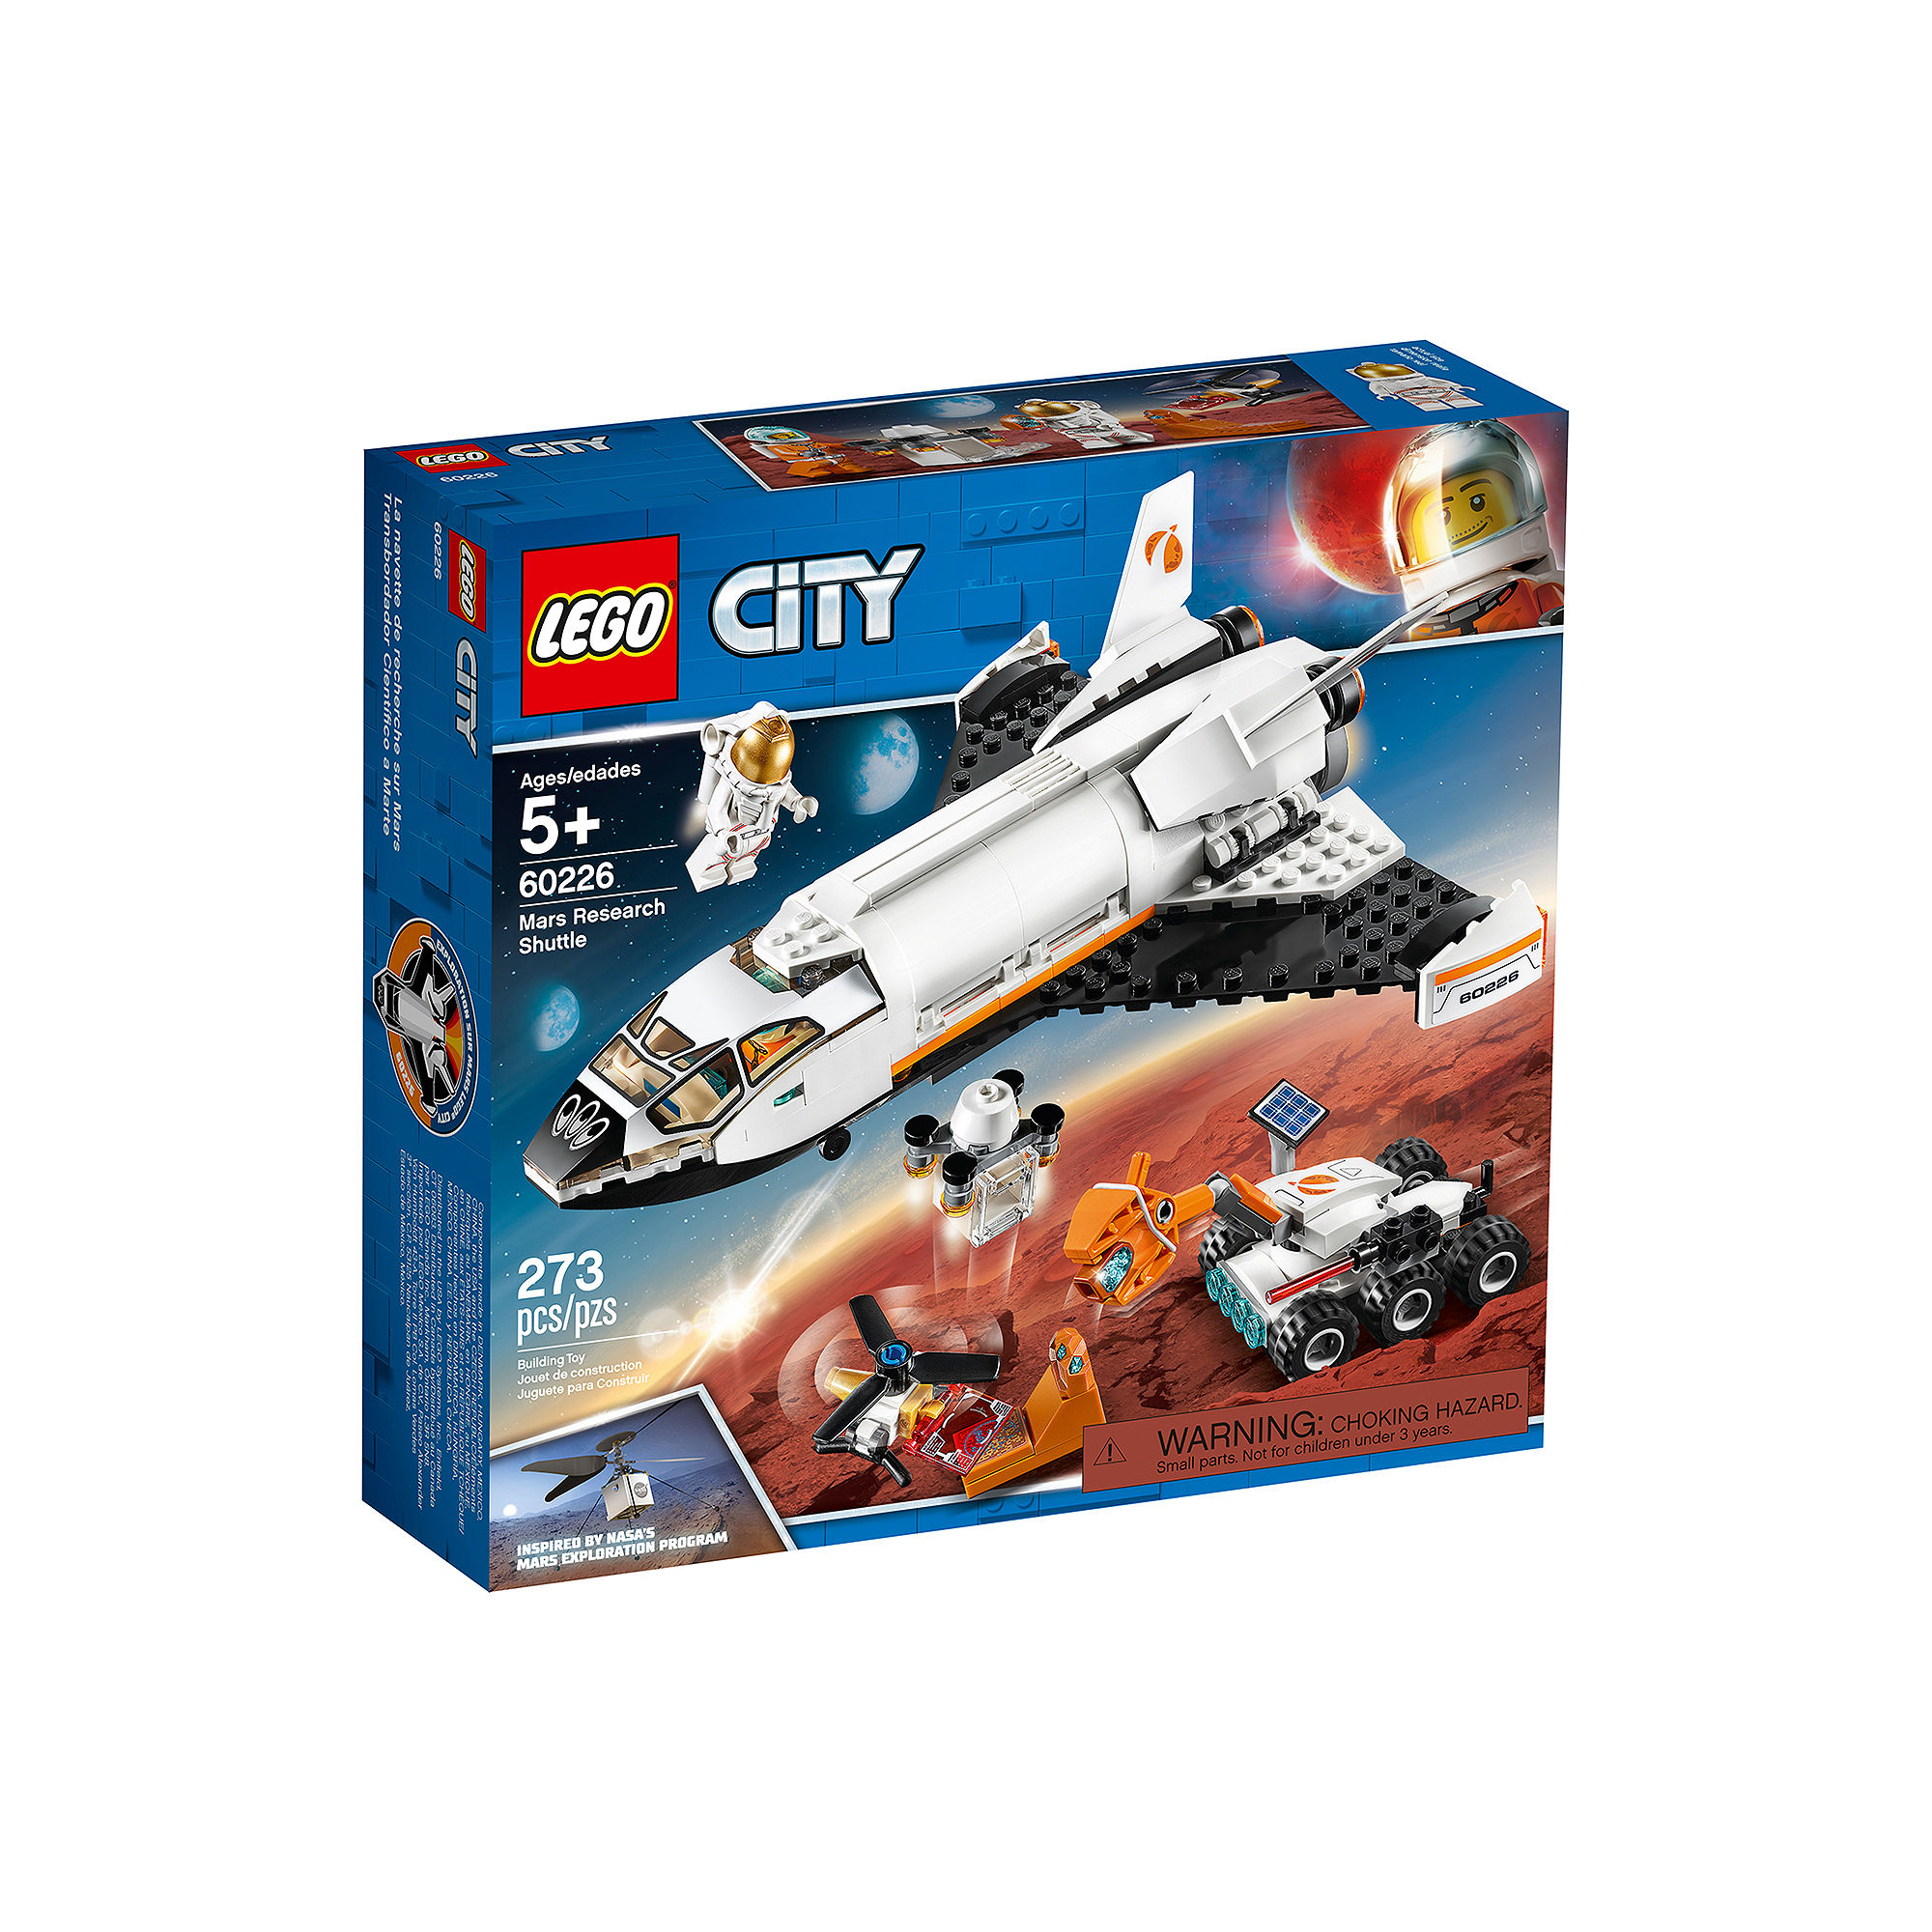 LEGO City 60226 Mars Research Space Shuttle NASA Playset with 2 Astronauts - image 3 of 3